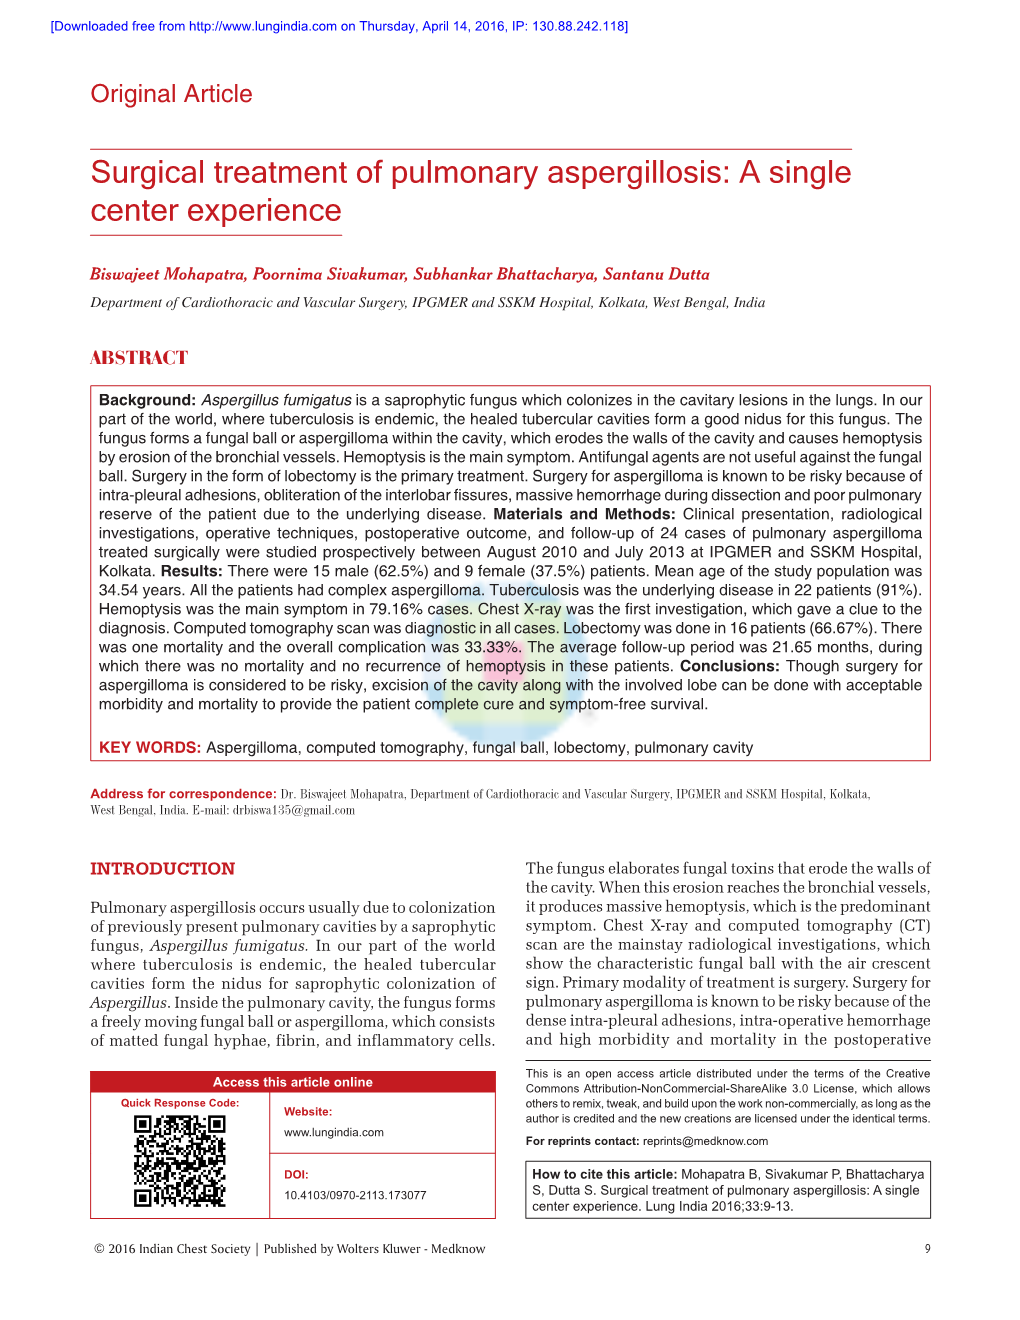 Surgical Treatment of Pulmonary Aspergillosis: a Single Center Experience